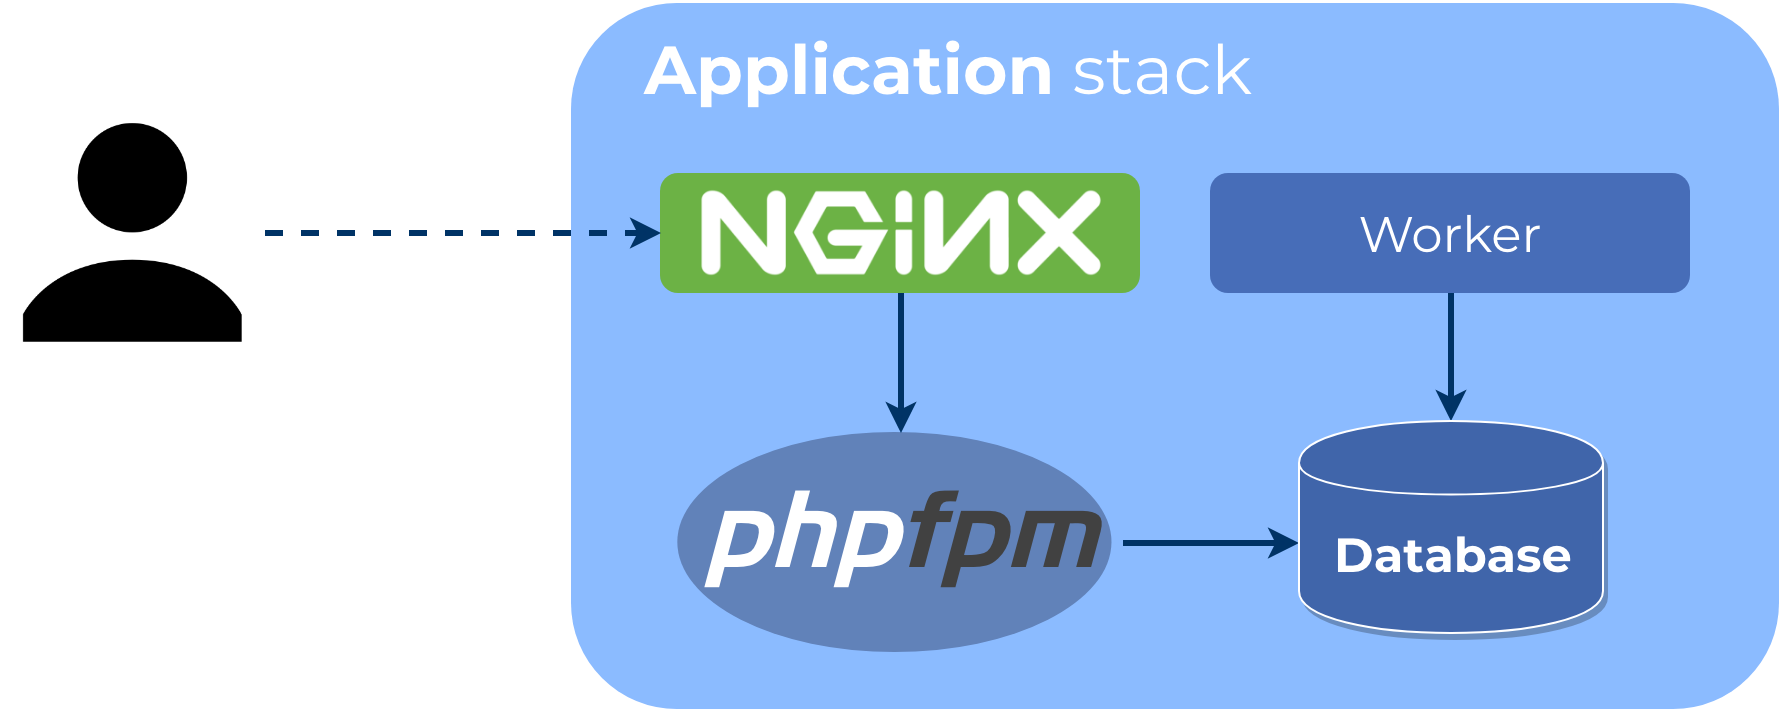 Application stack